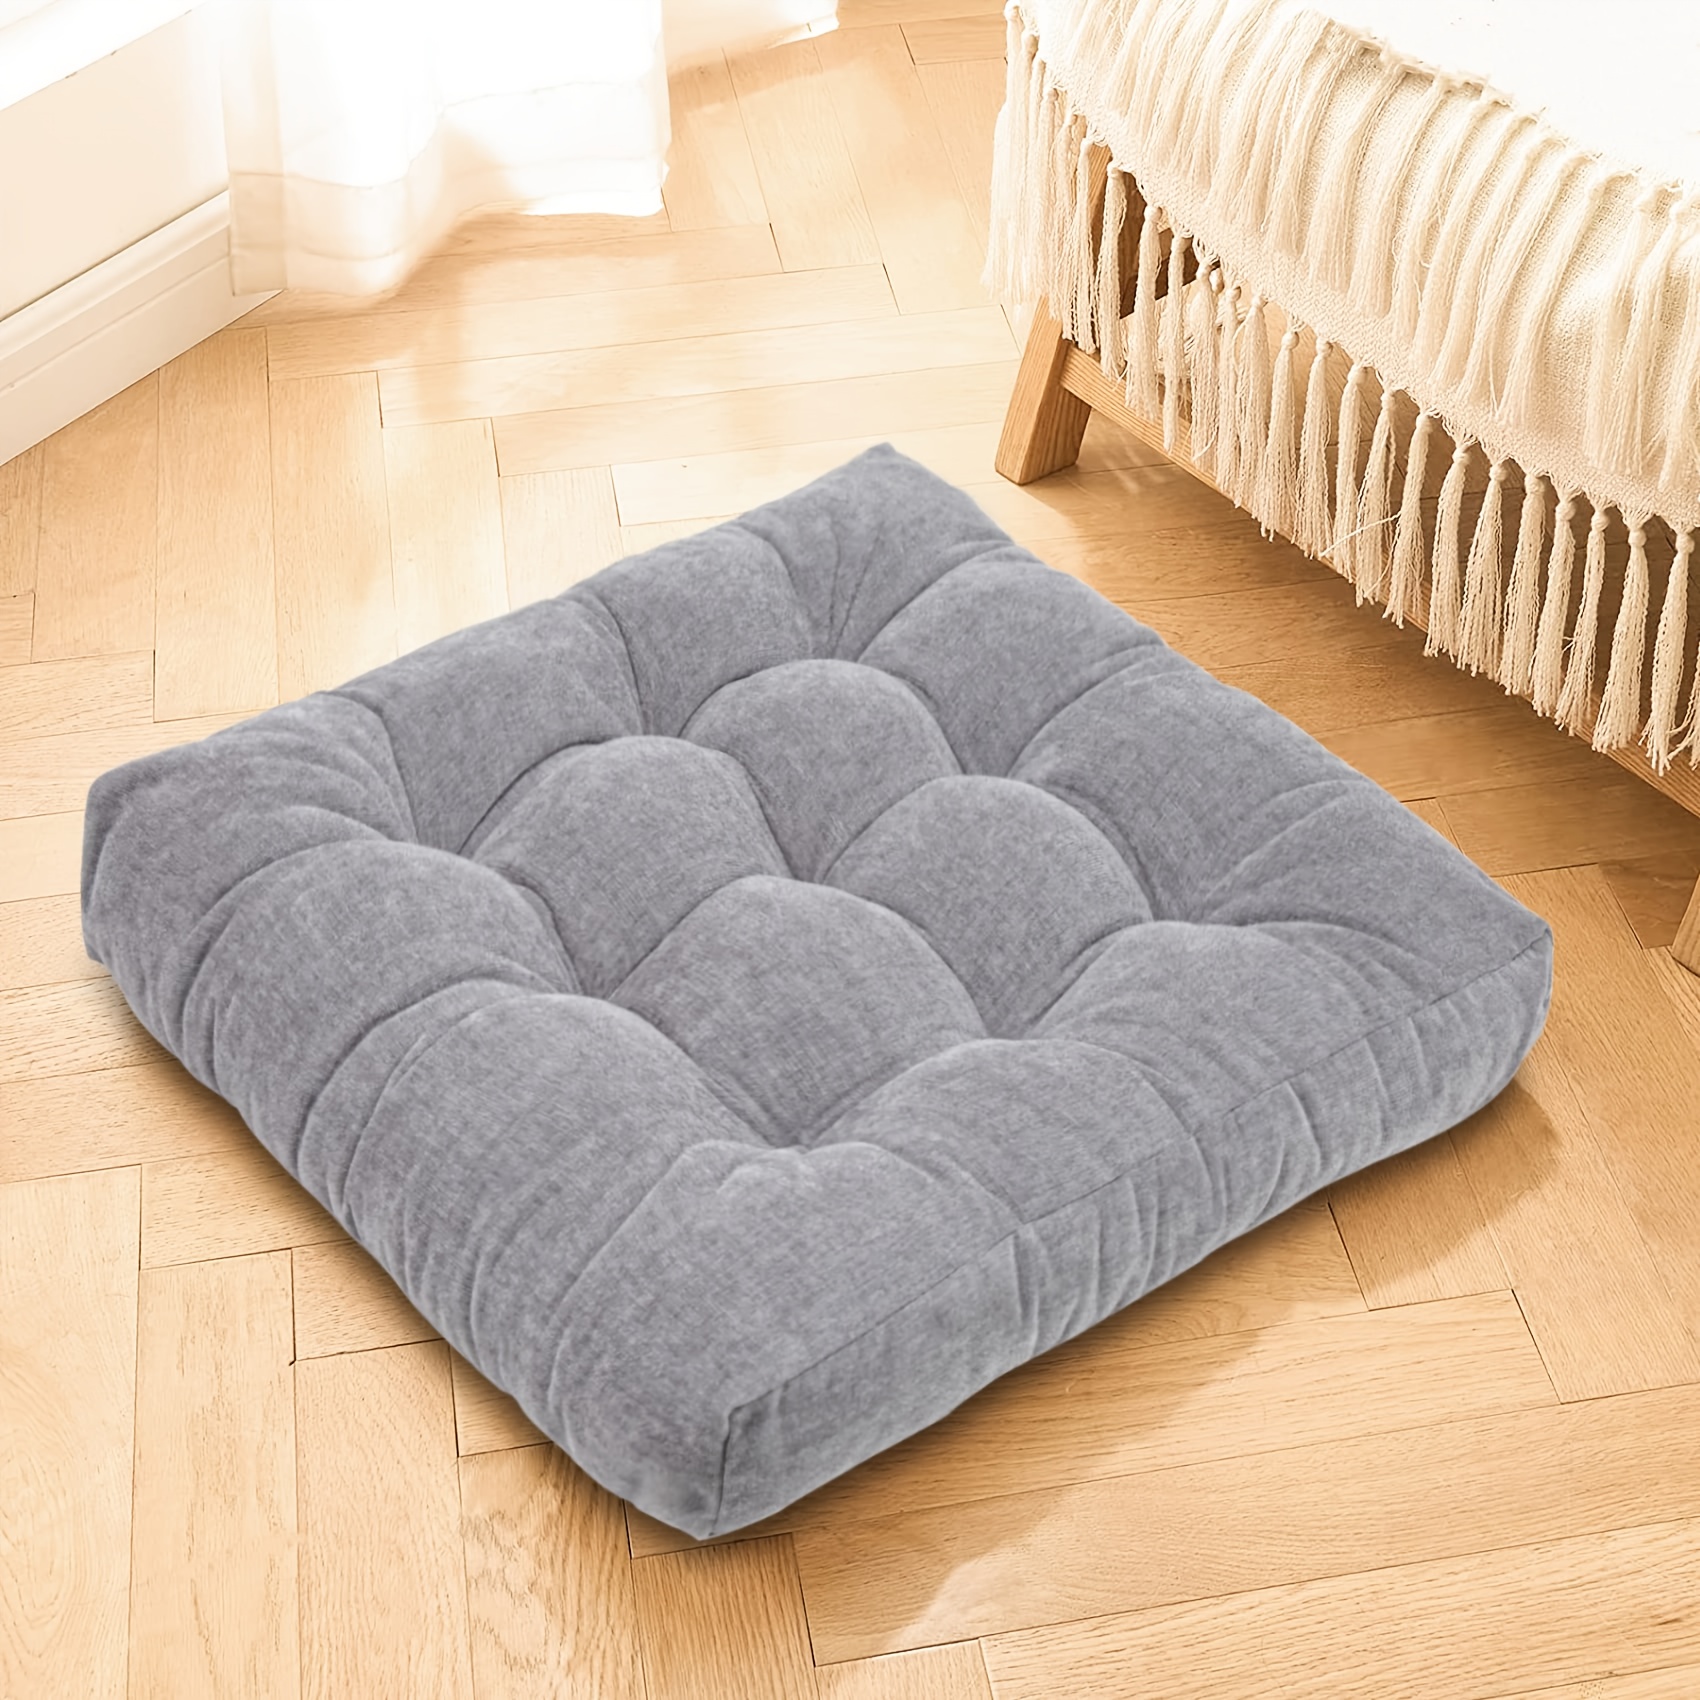 1pc 22 Inch Meditation Floor Pillow,Square Large Pillows Seating